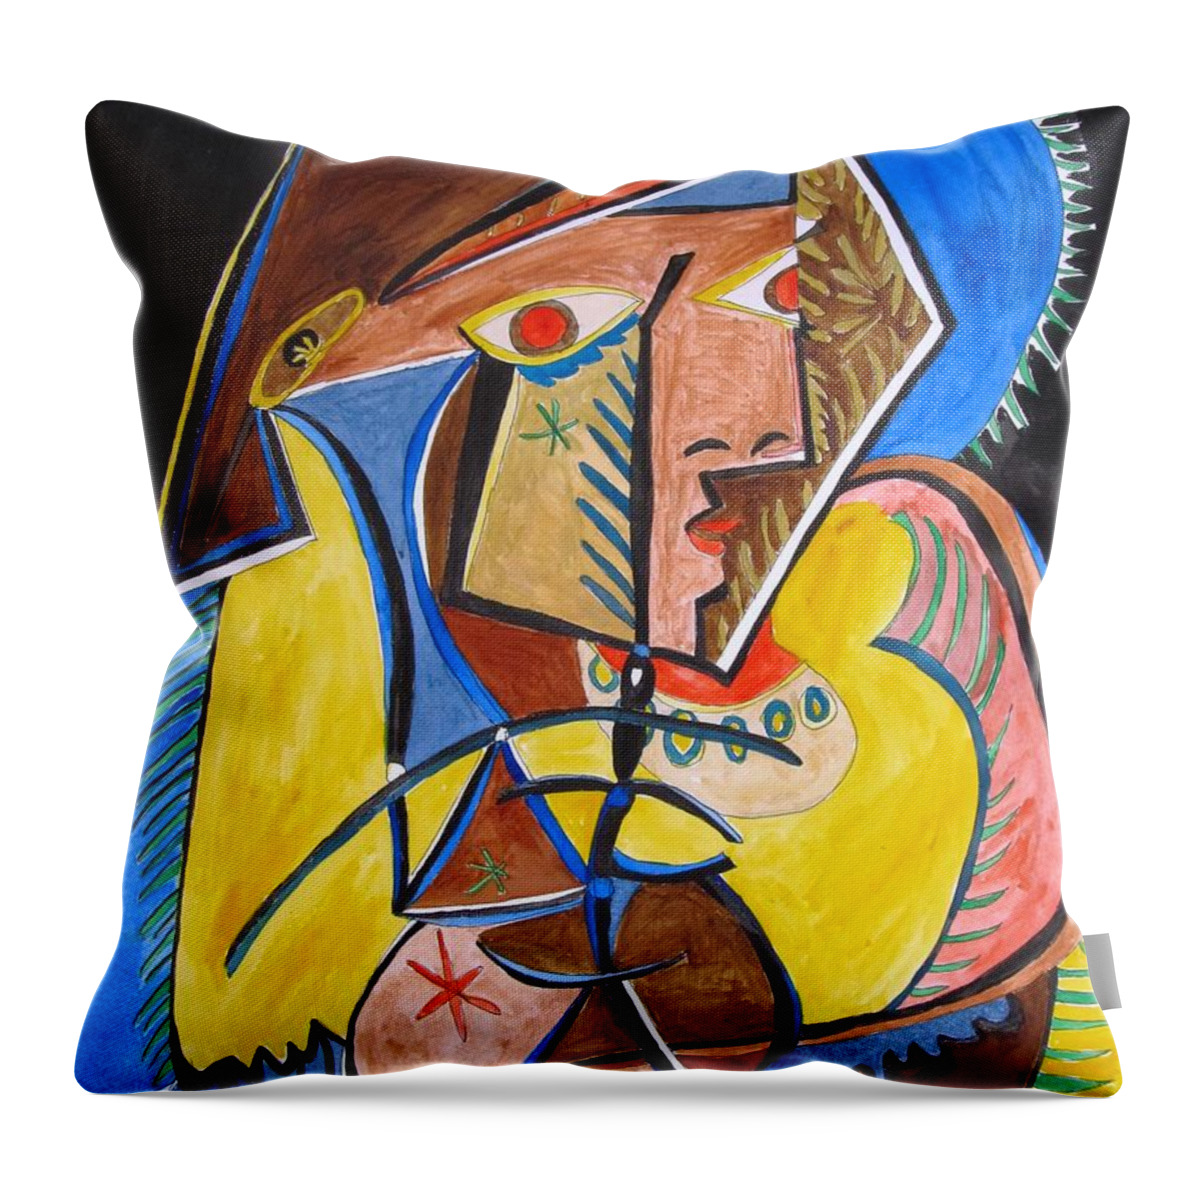 Deconstructing Picasso - A Sexy Woman Throw Pillow featuring the painting Deconstructing Picasso - a Sexy Woman by Esther Newman-Cohen